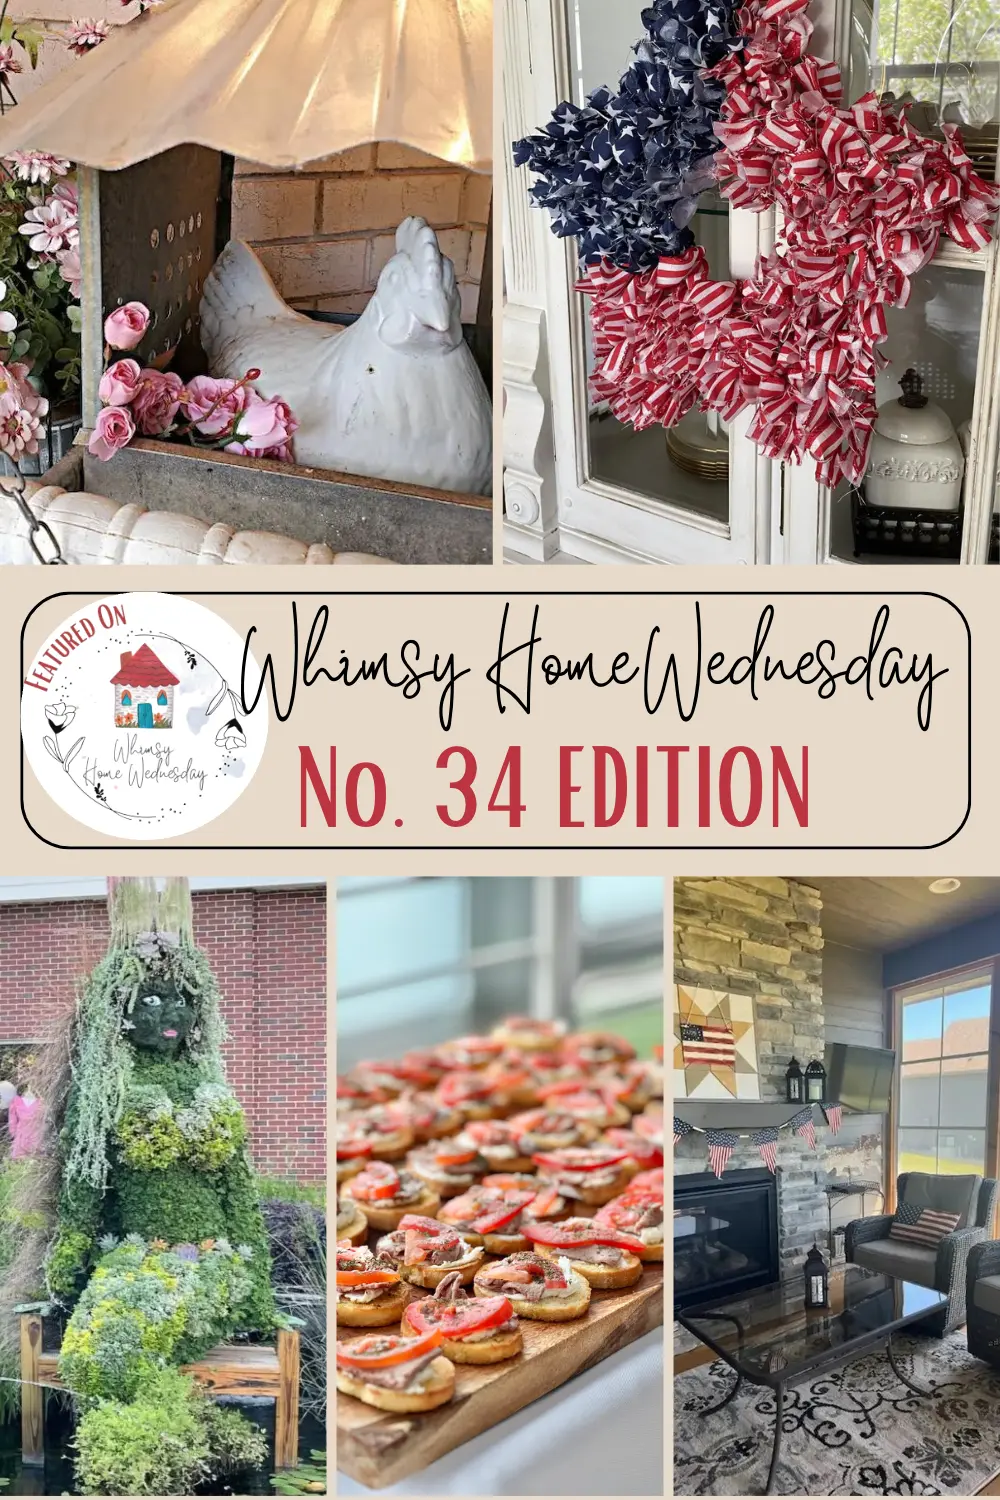 Join us on Whimsy Home Wednesday Blog Link Party No. 34 and see host projects, the features from the previous week and link up your posts!